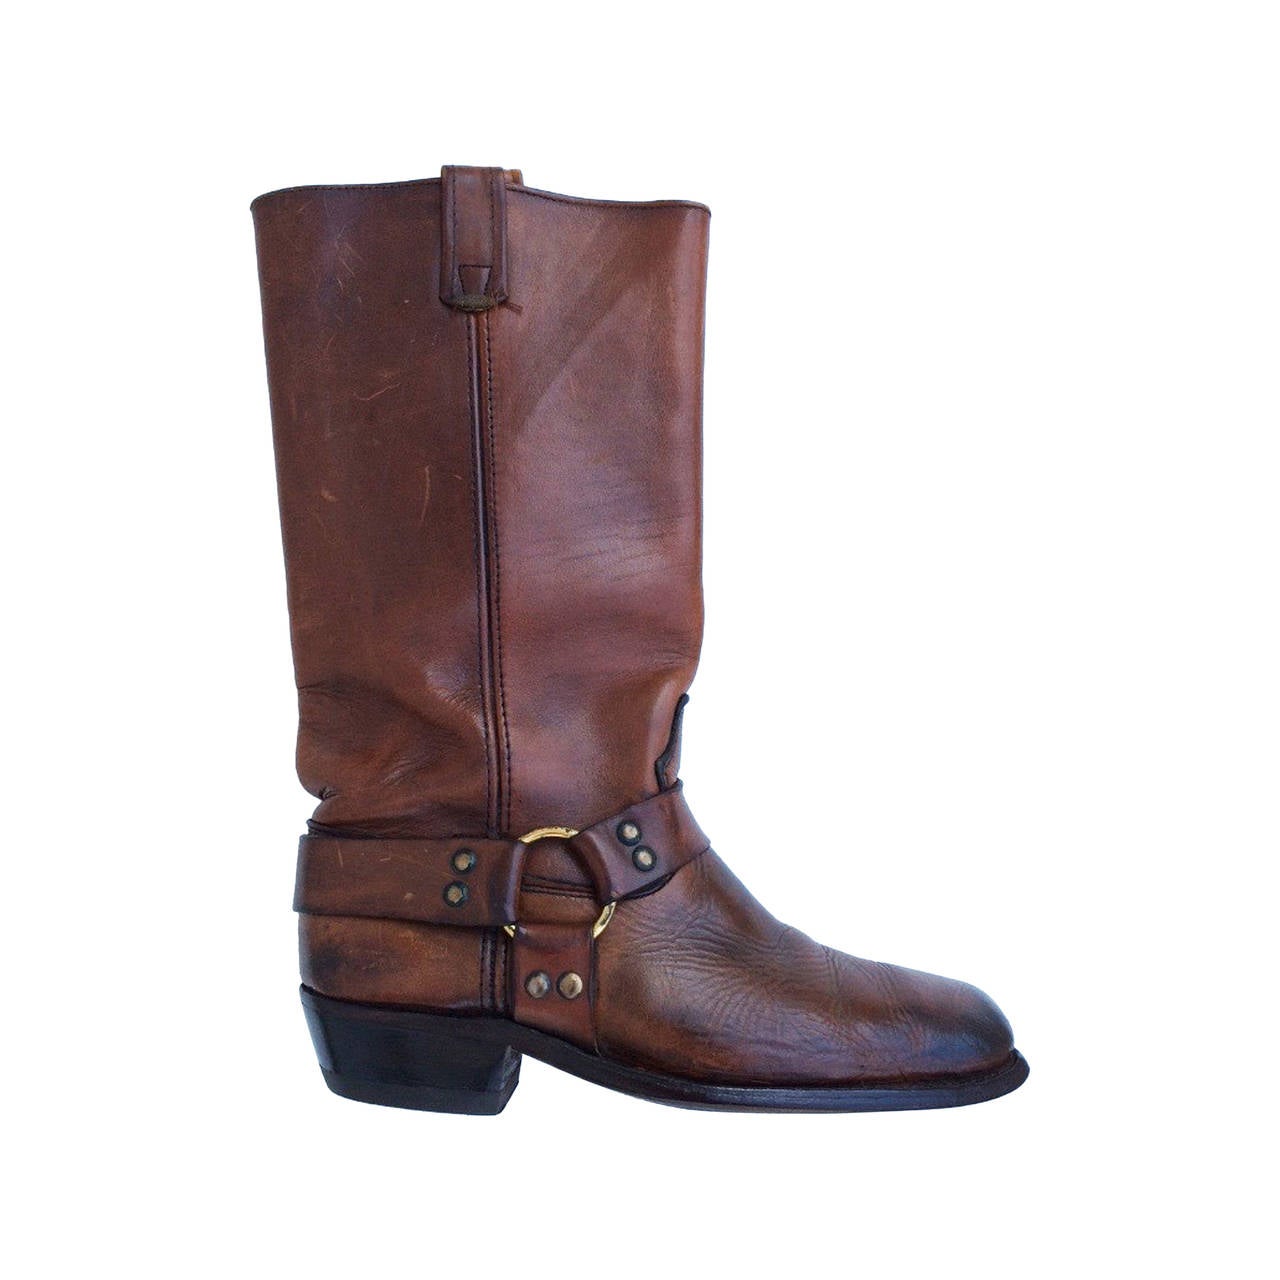 Gents Frye Leather Ring Harness Boots 9D 1970s at 1stdibs